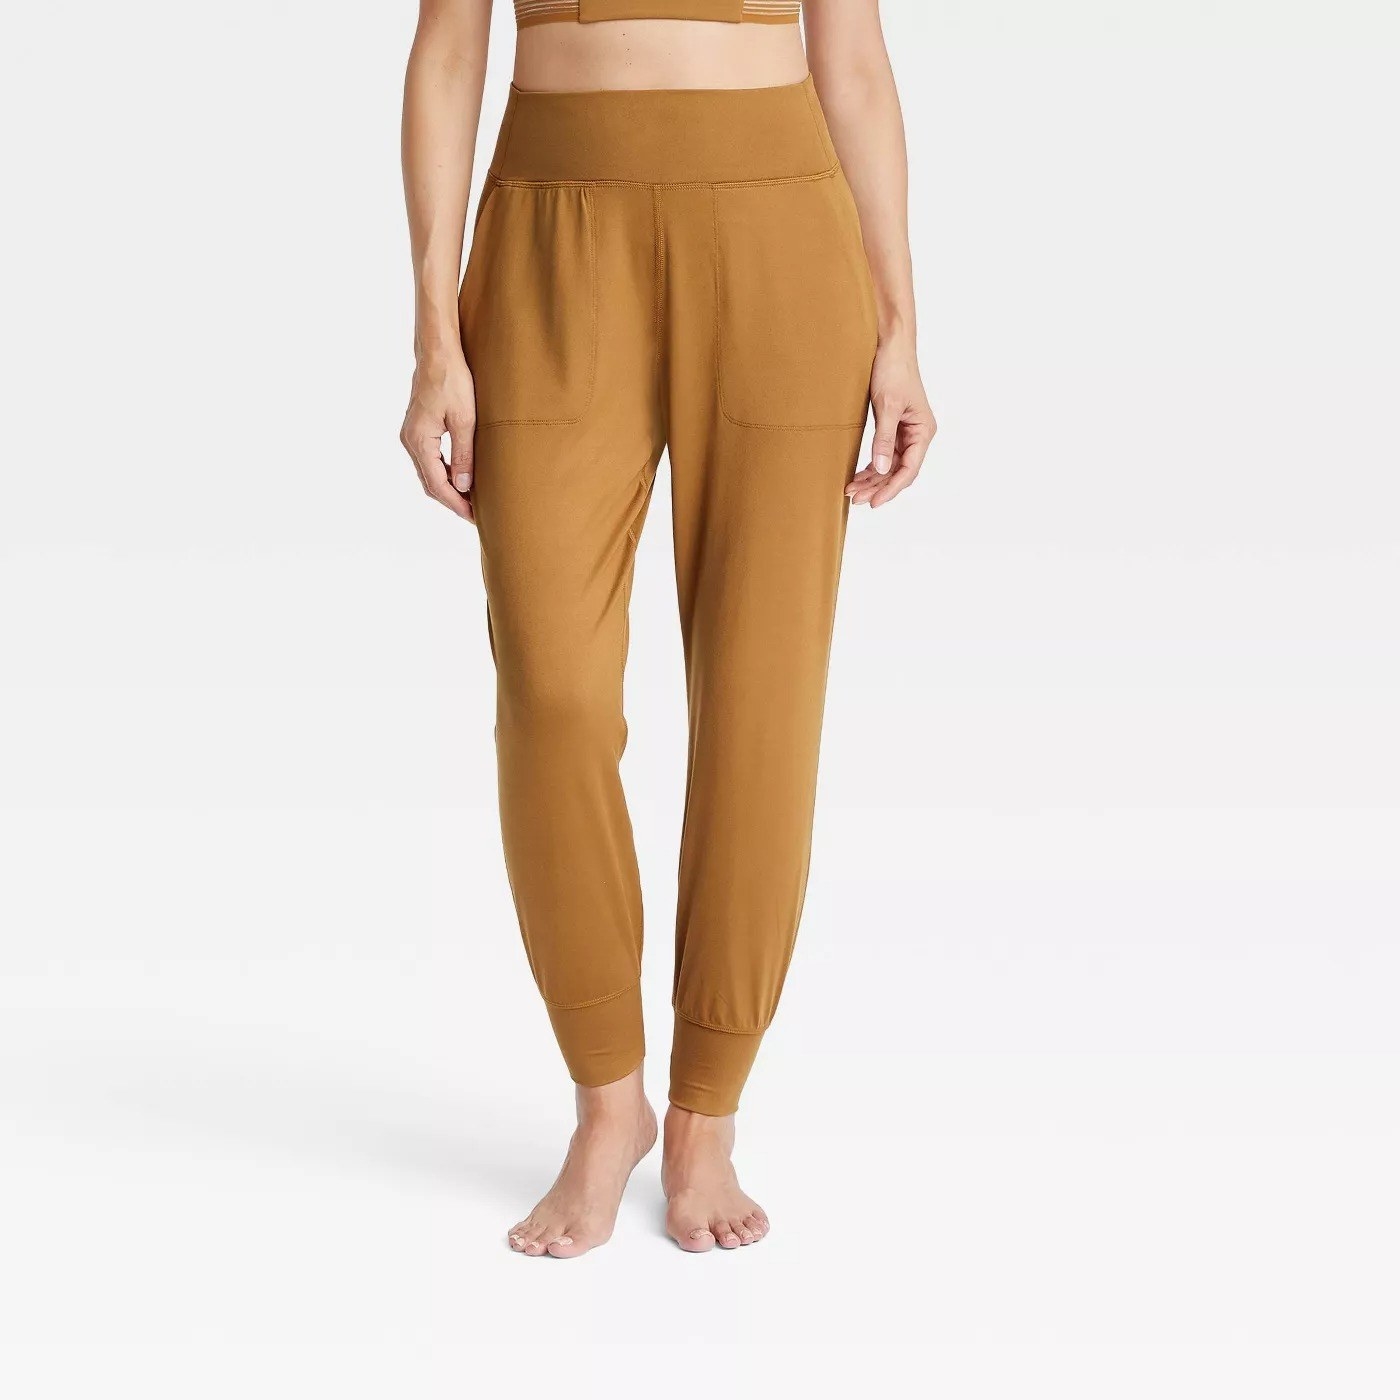 The high-waisted, mustard-colored joggers